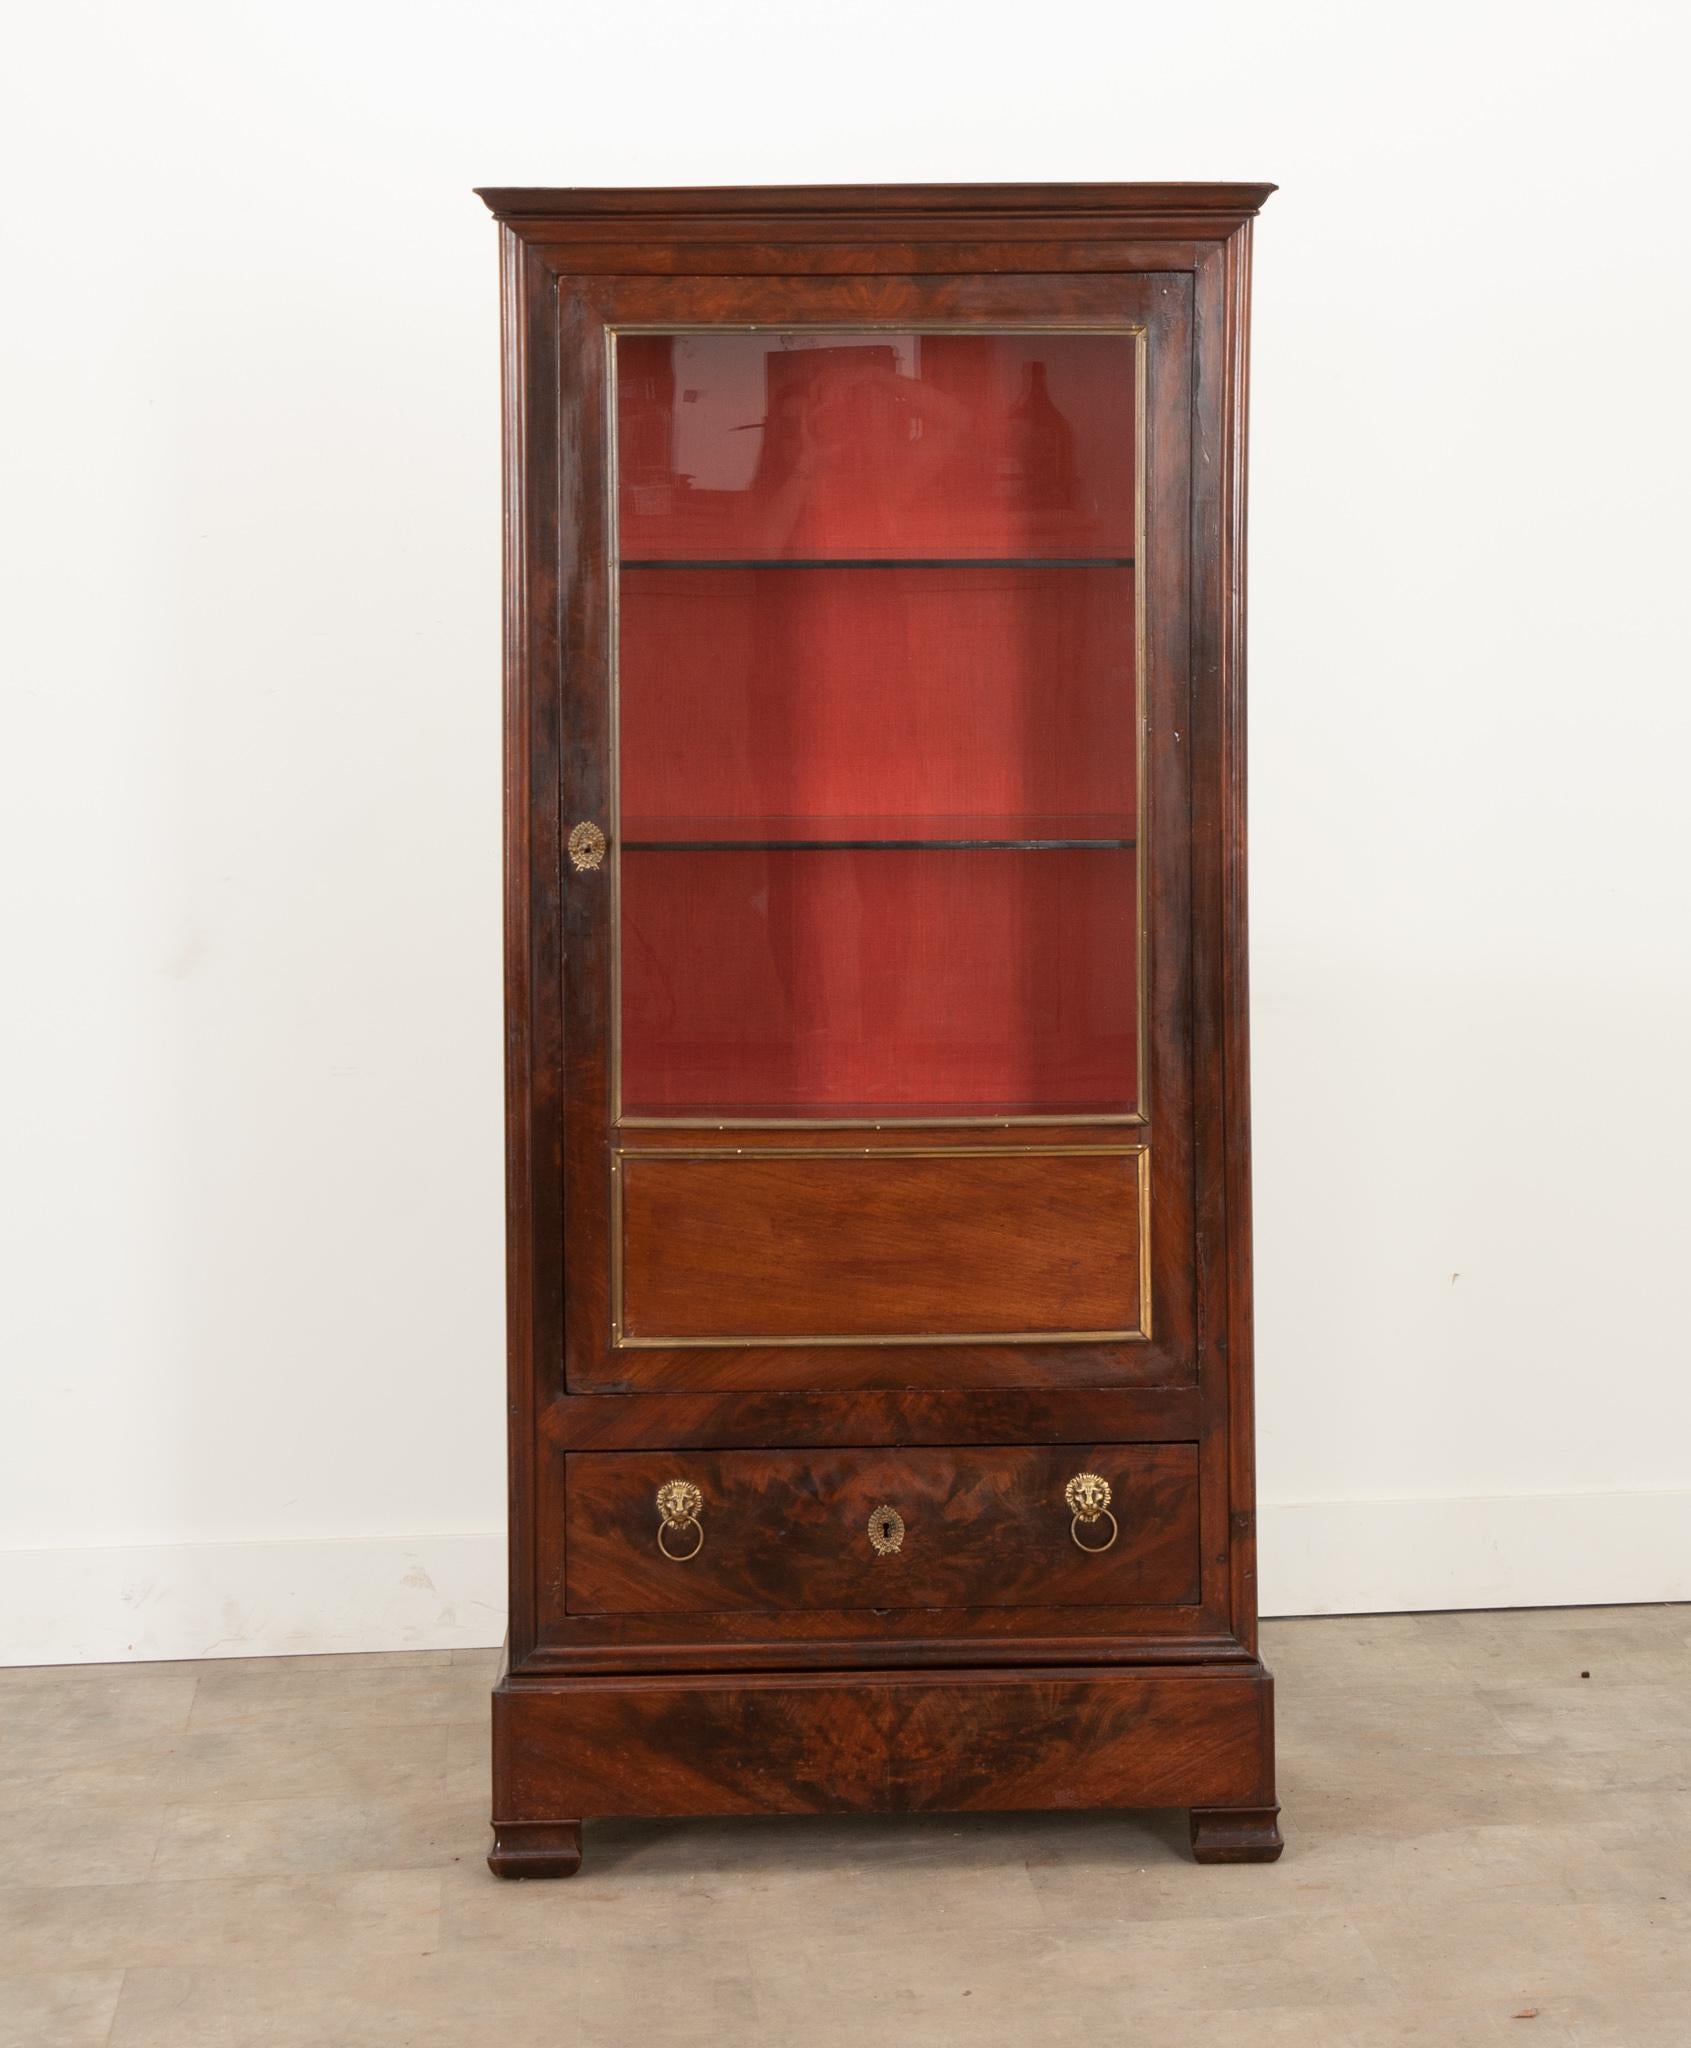 This Louis Philippe vitrine was crafted in France during the 19th century from finley bookmatched mahogany. A brass border encompasses the large single pane of glass and faux panel below it. The interior is lined with a vibrant red linen blend